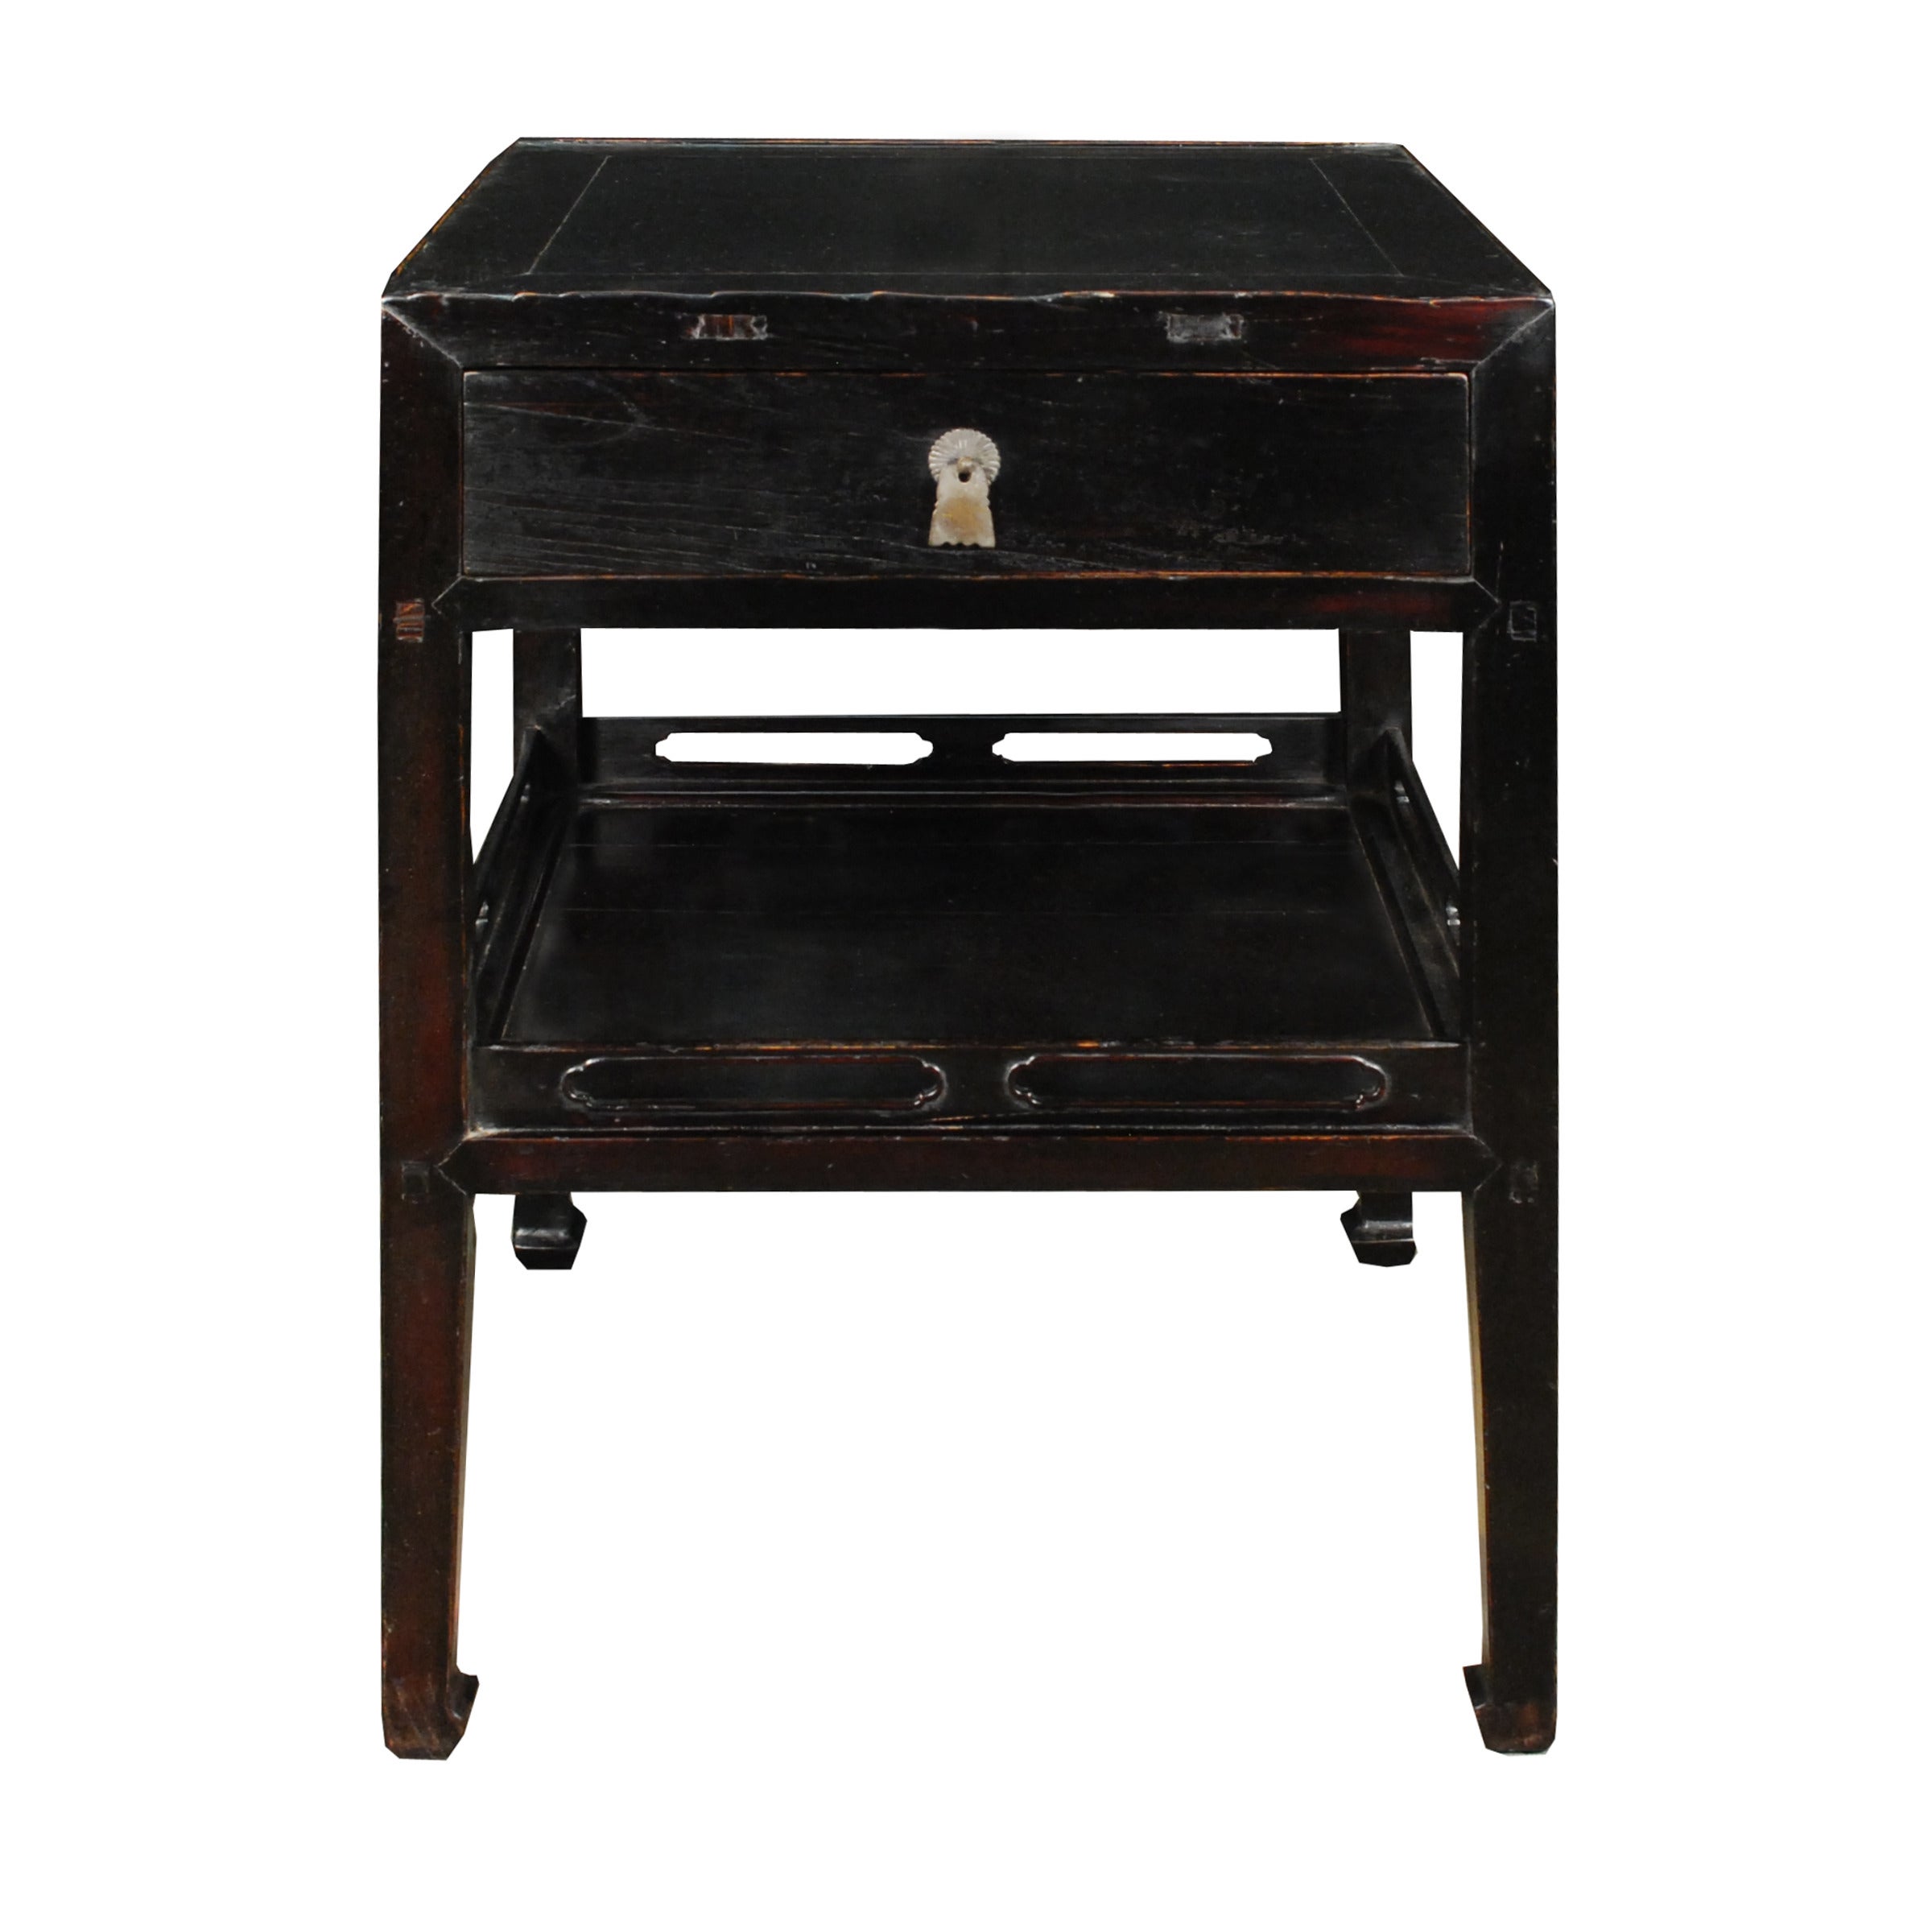 Early 20th Century Chinese Table with Shelf